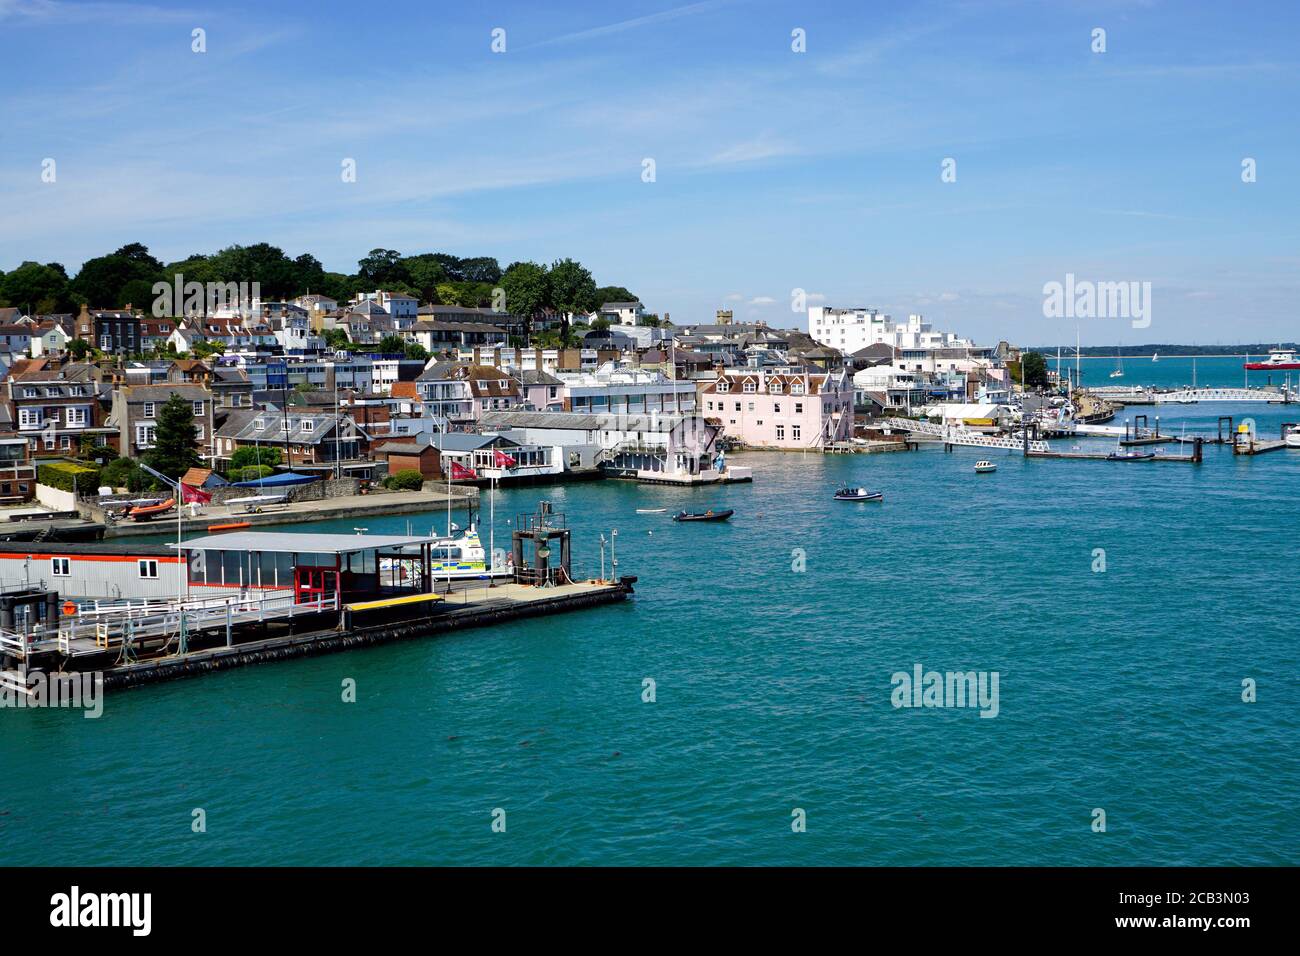 Cowes, Isle of Wight, UK. July 22, 2020.  The yachting capital of Cowes taken from the Southampton ferry on a quiet day in july at Cowes on the Isle o Stock Photo